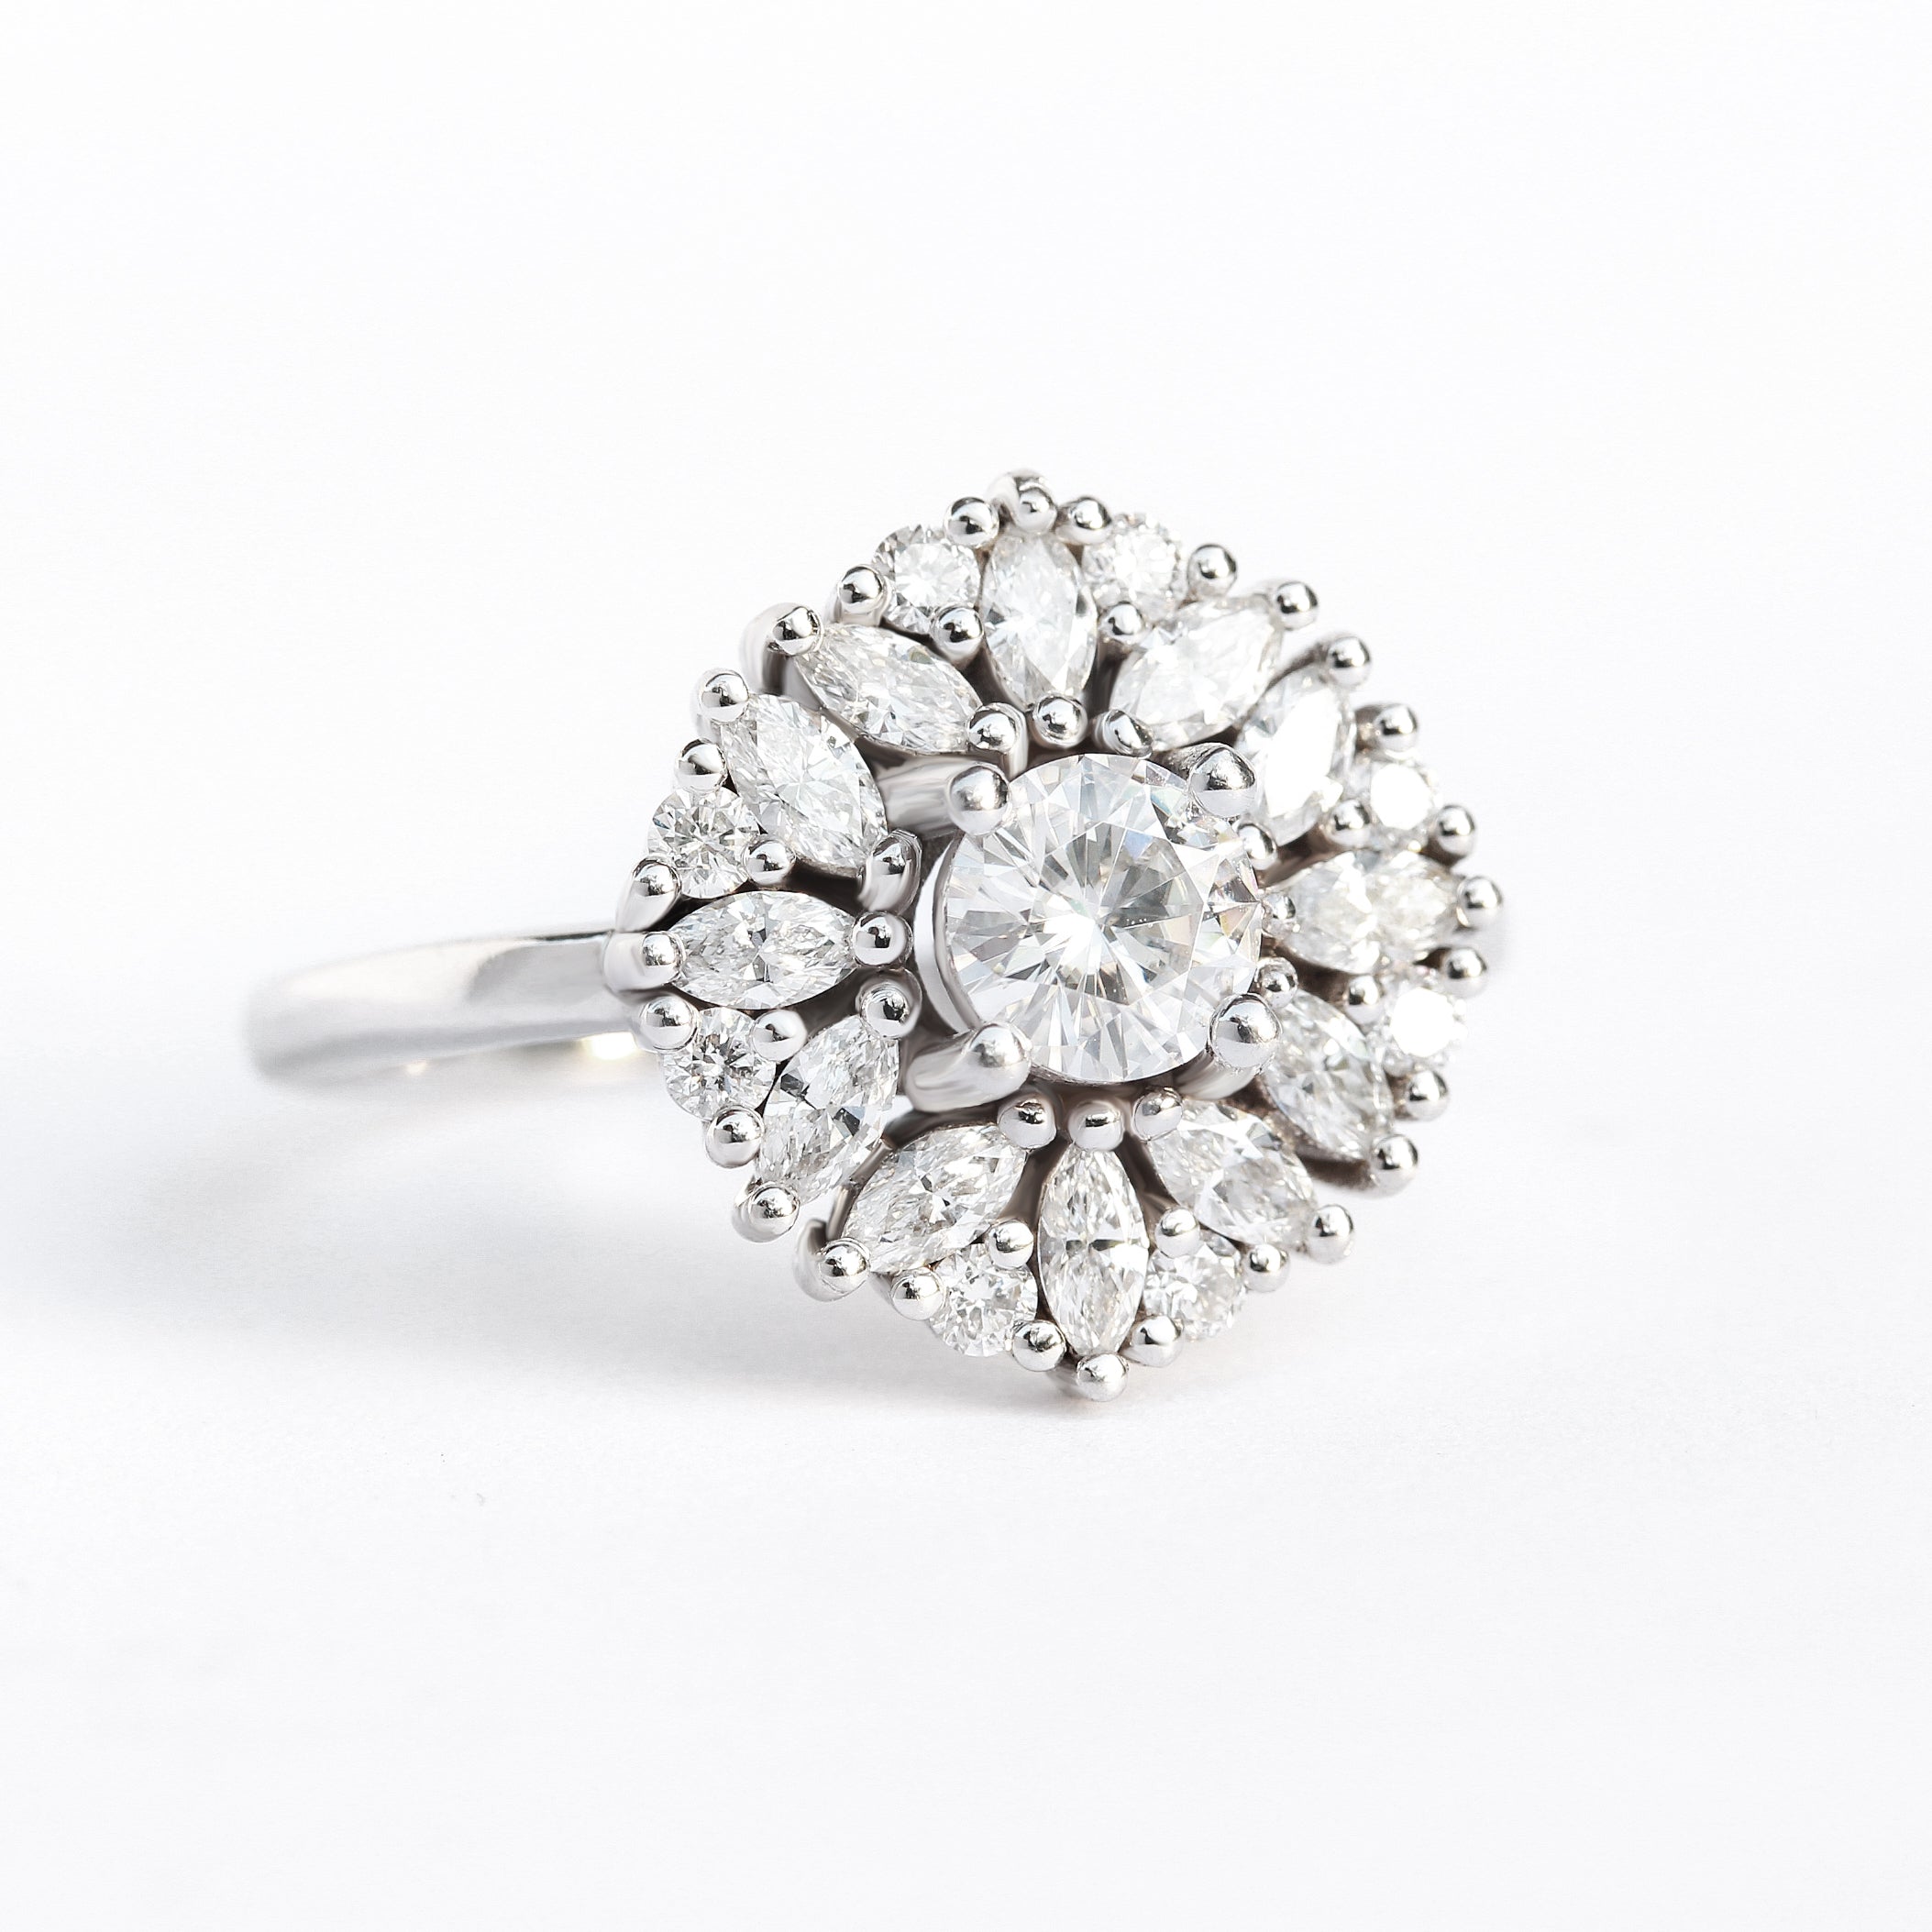 Delicate round cut art deco diamond engagement ring, Harper - Ready to ship in 14K white gold & size 6.5 ♥